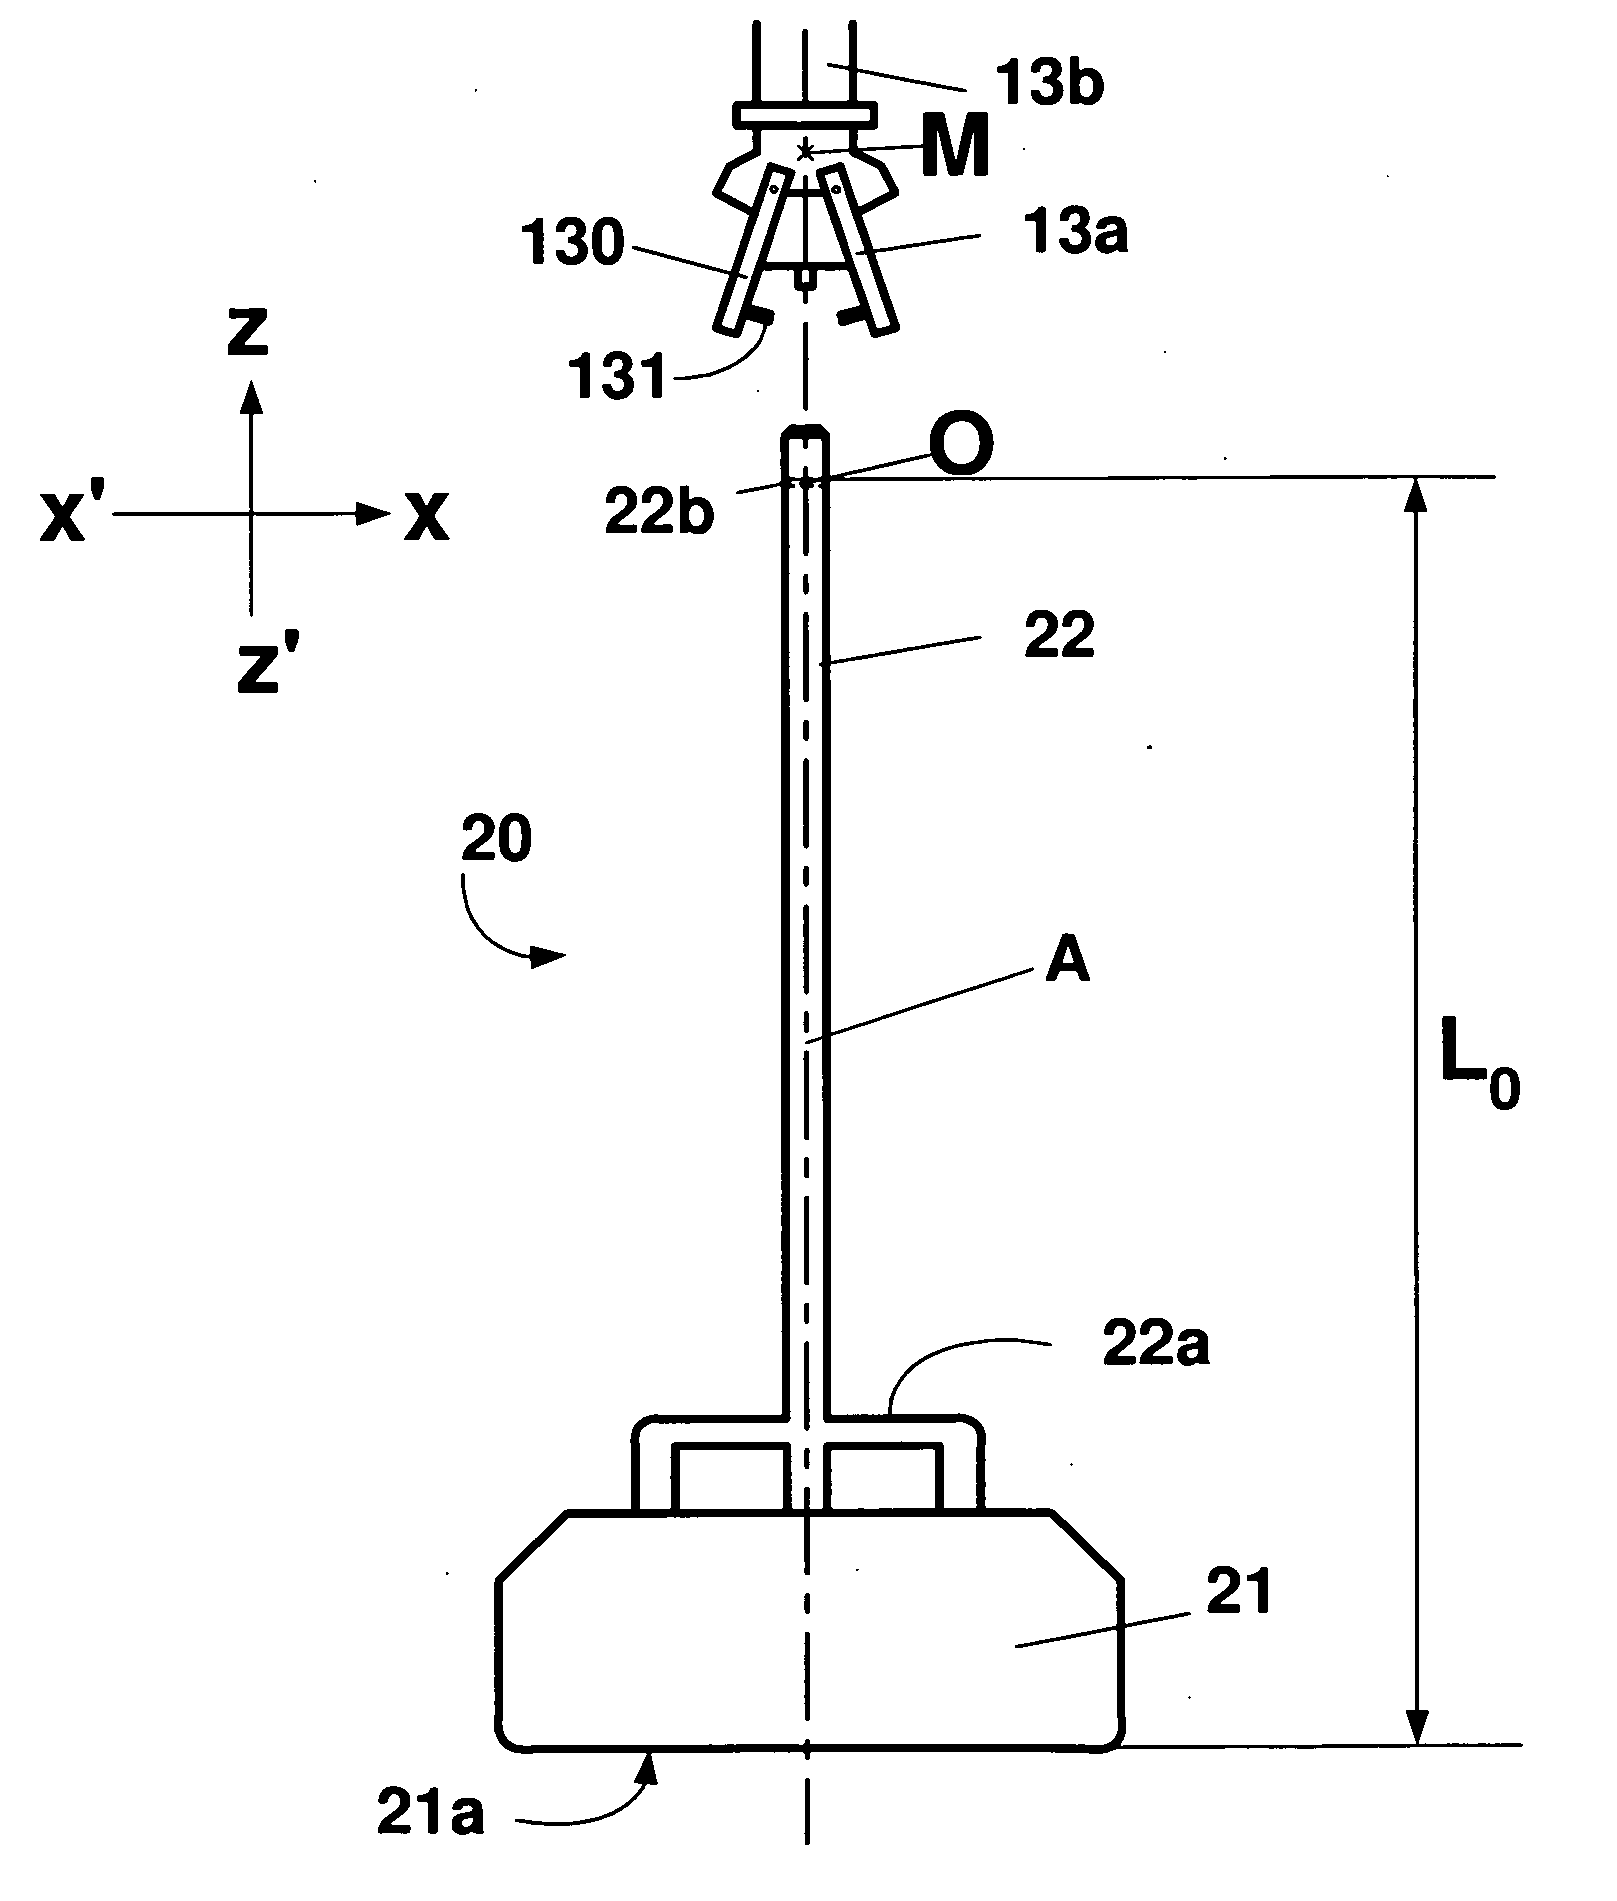 Method of measuring, on the fly, the height of an electrolysis anode